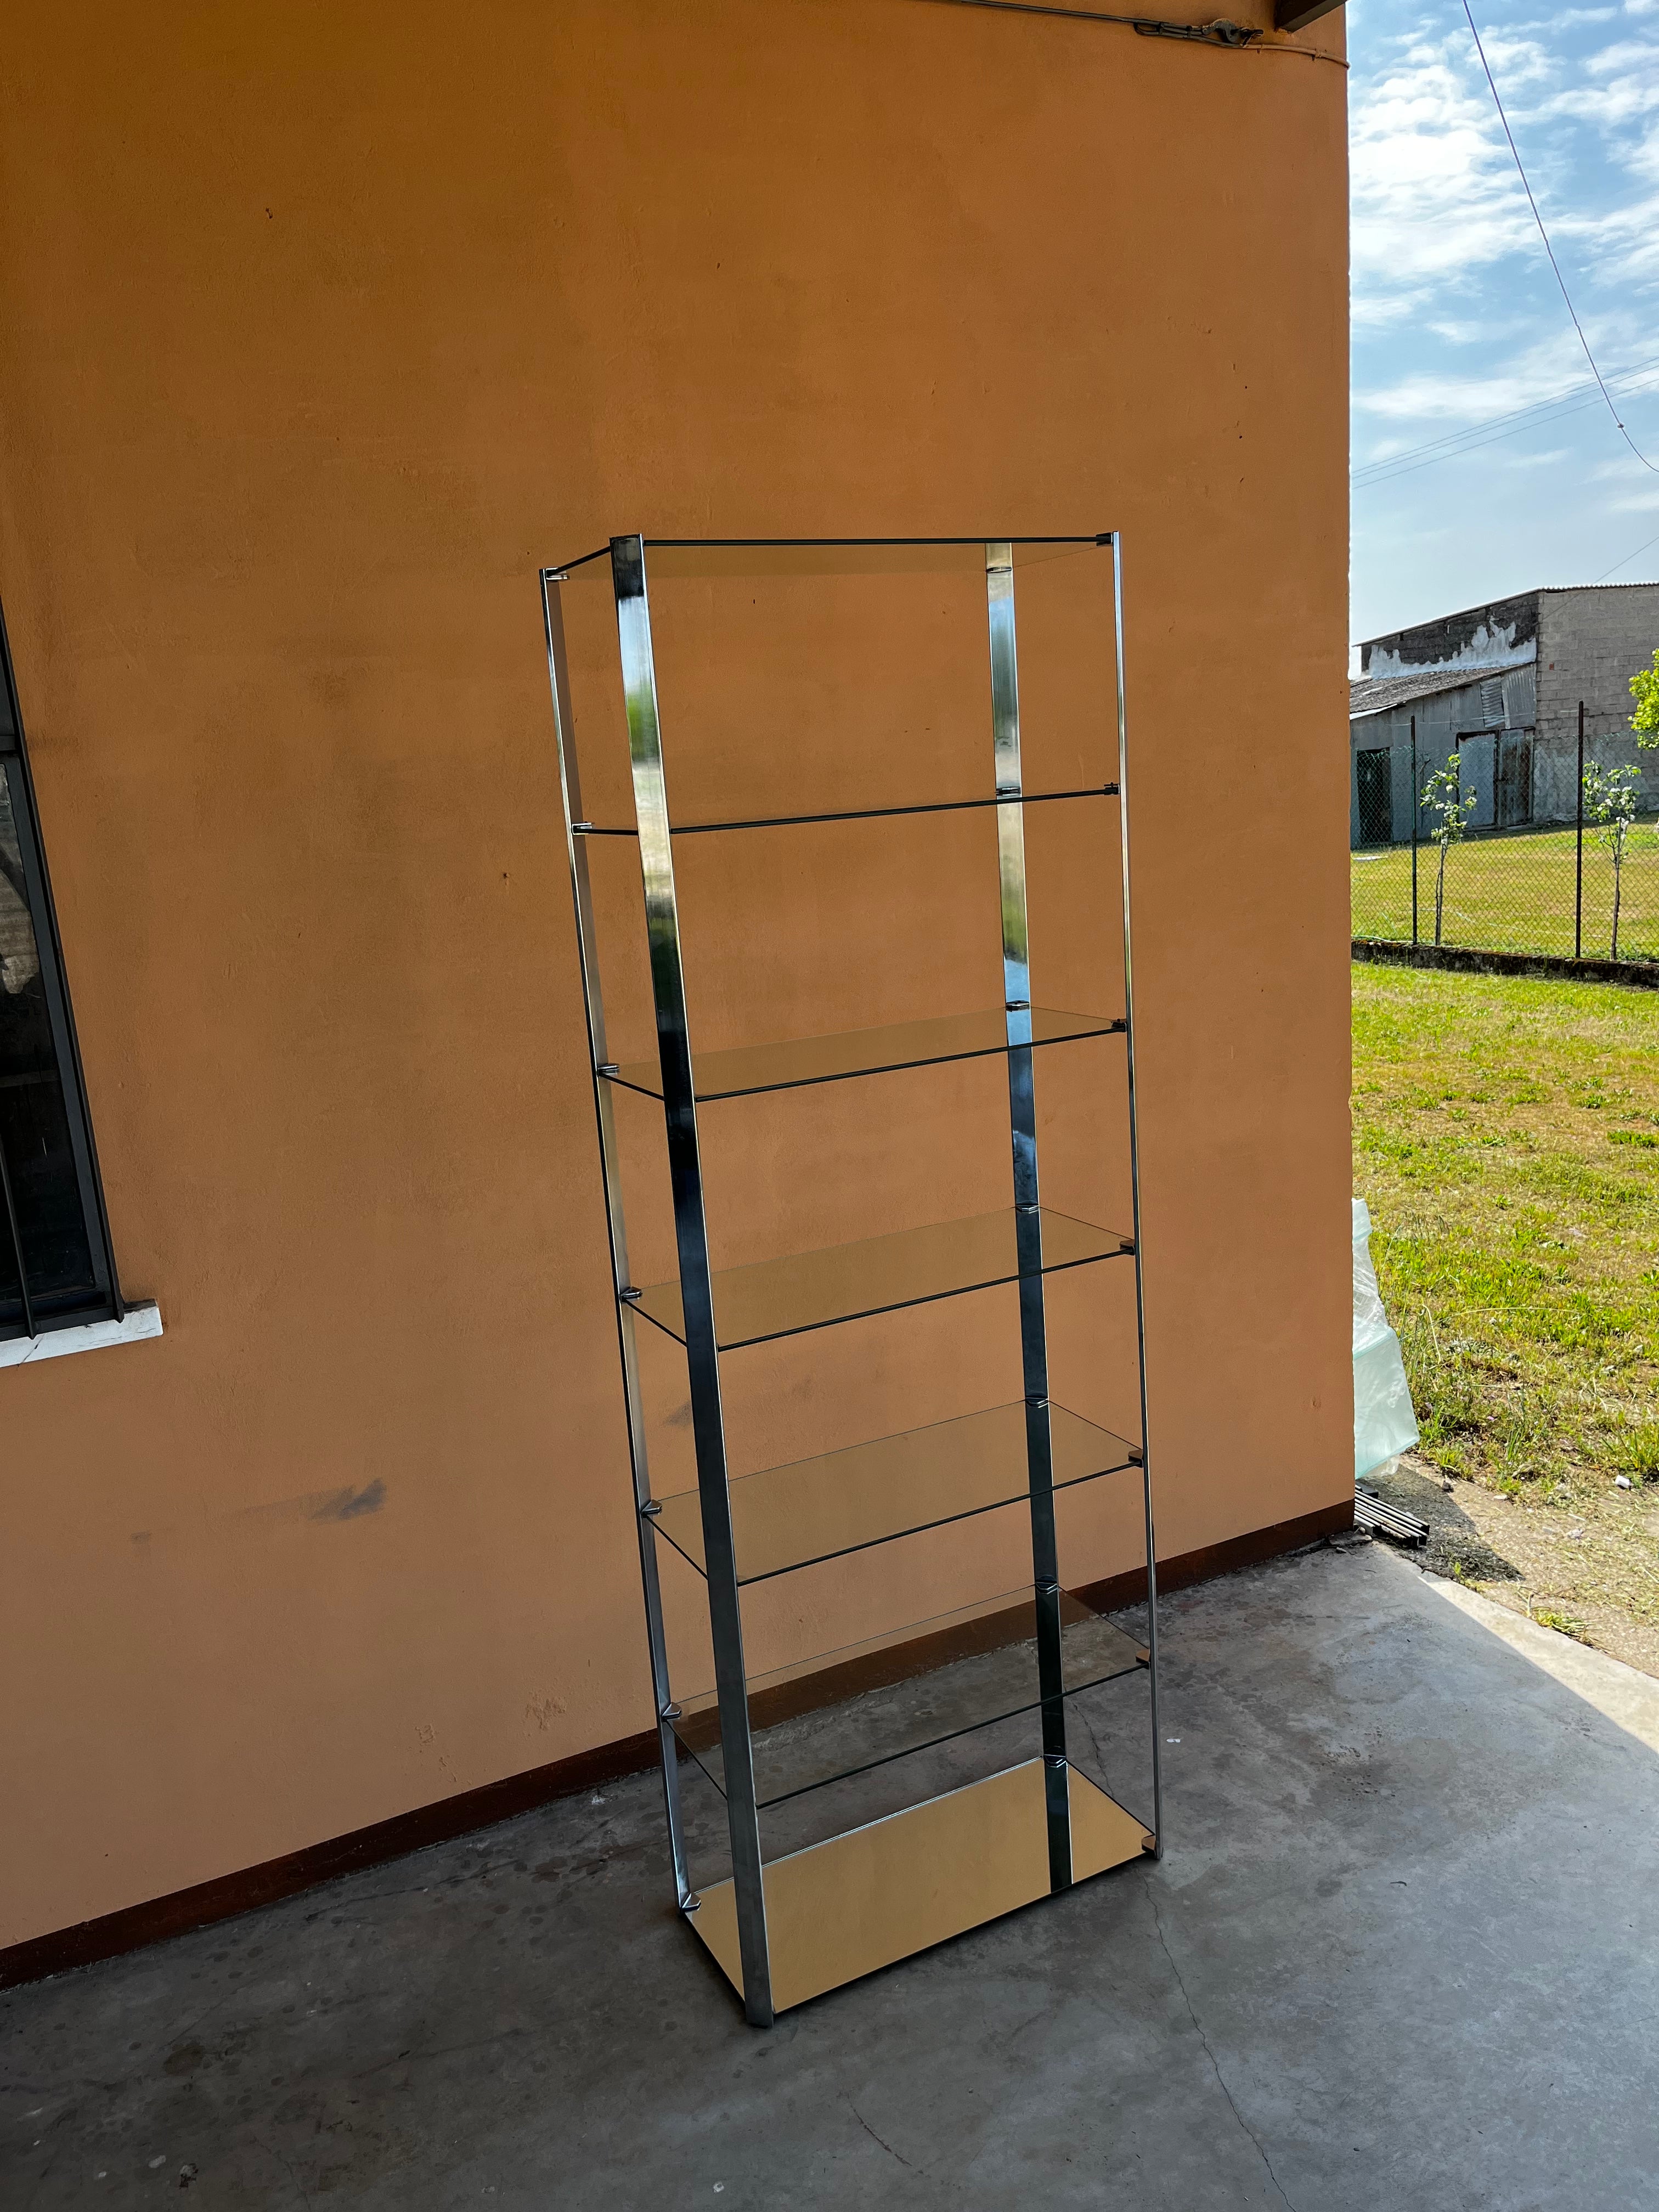 1970s Willy Rizzo steel glass and mirror shelves Cdue Production bookcase
Glass and mirrors are original from 1970s period. They shows some wears coherent with age but no structural damages.

General good conditions. No restoration needed. A